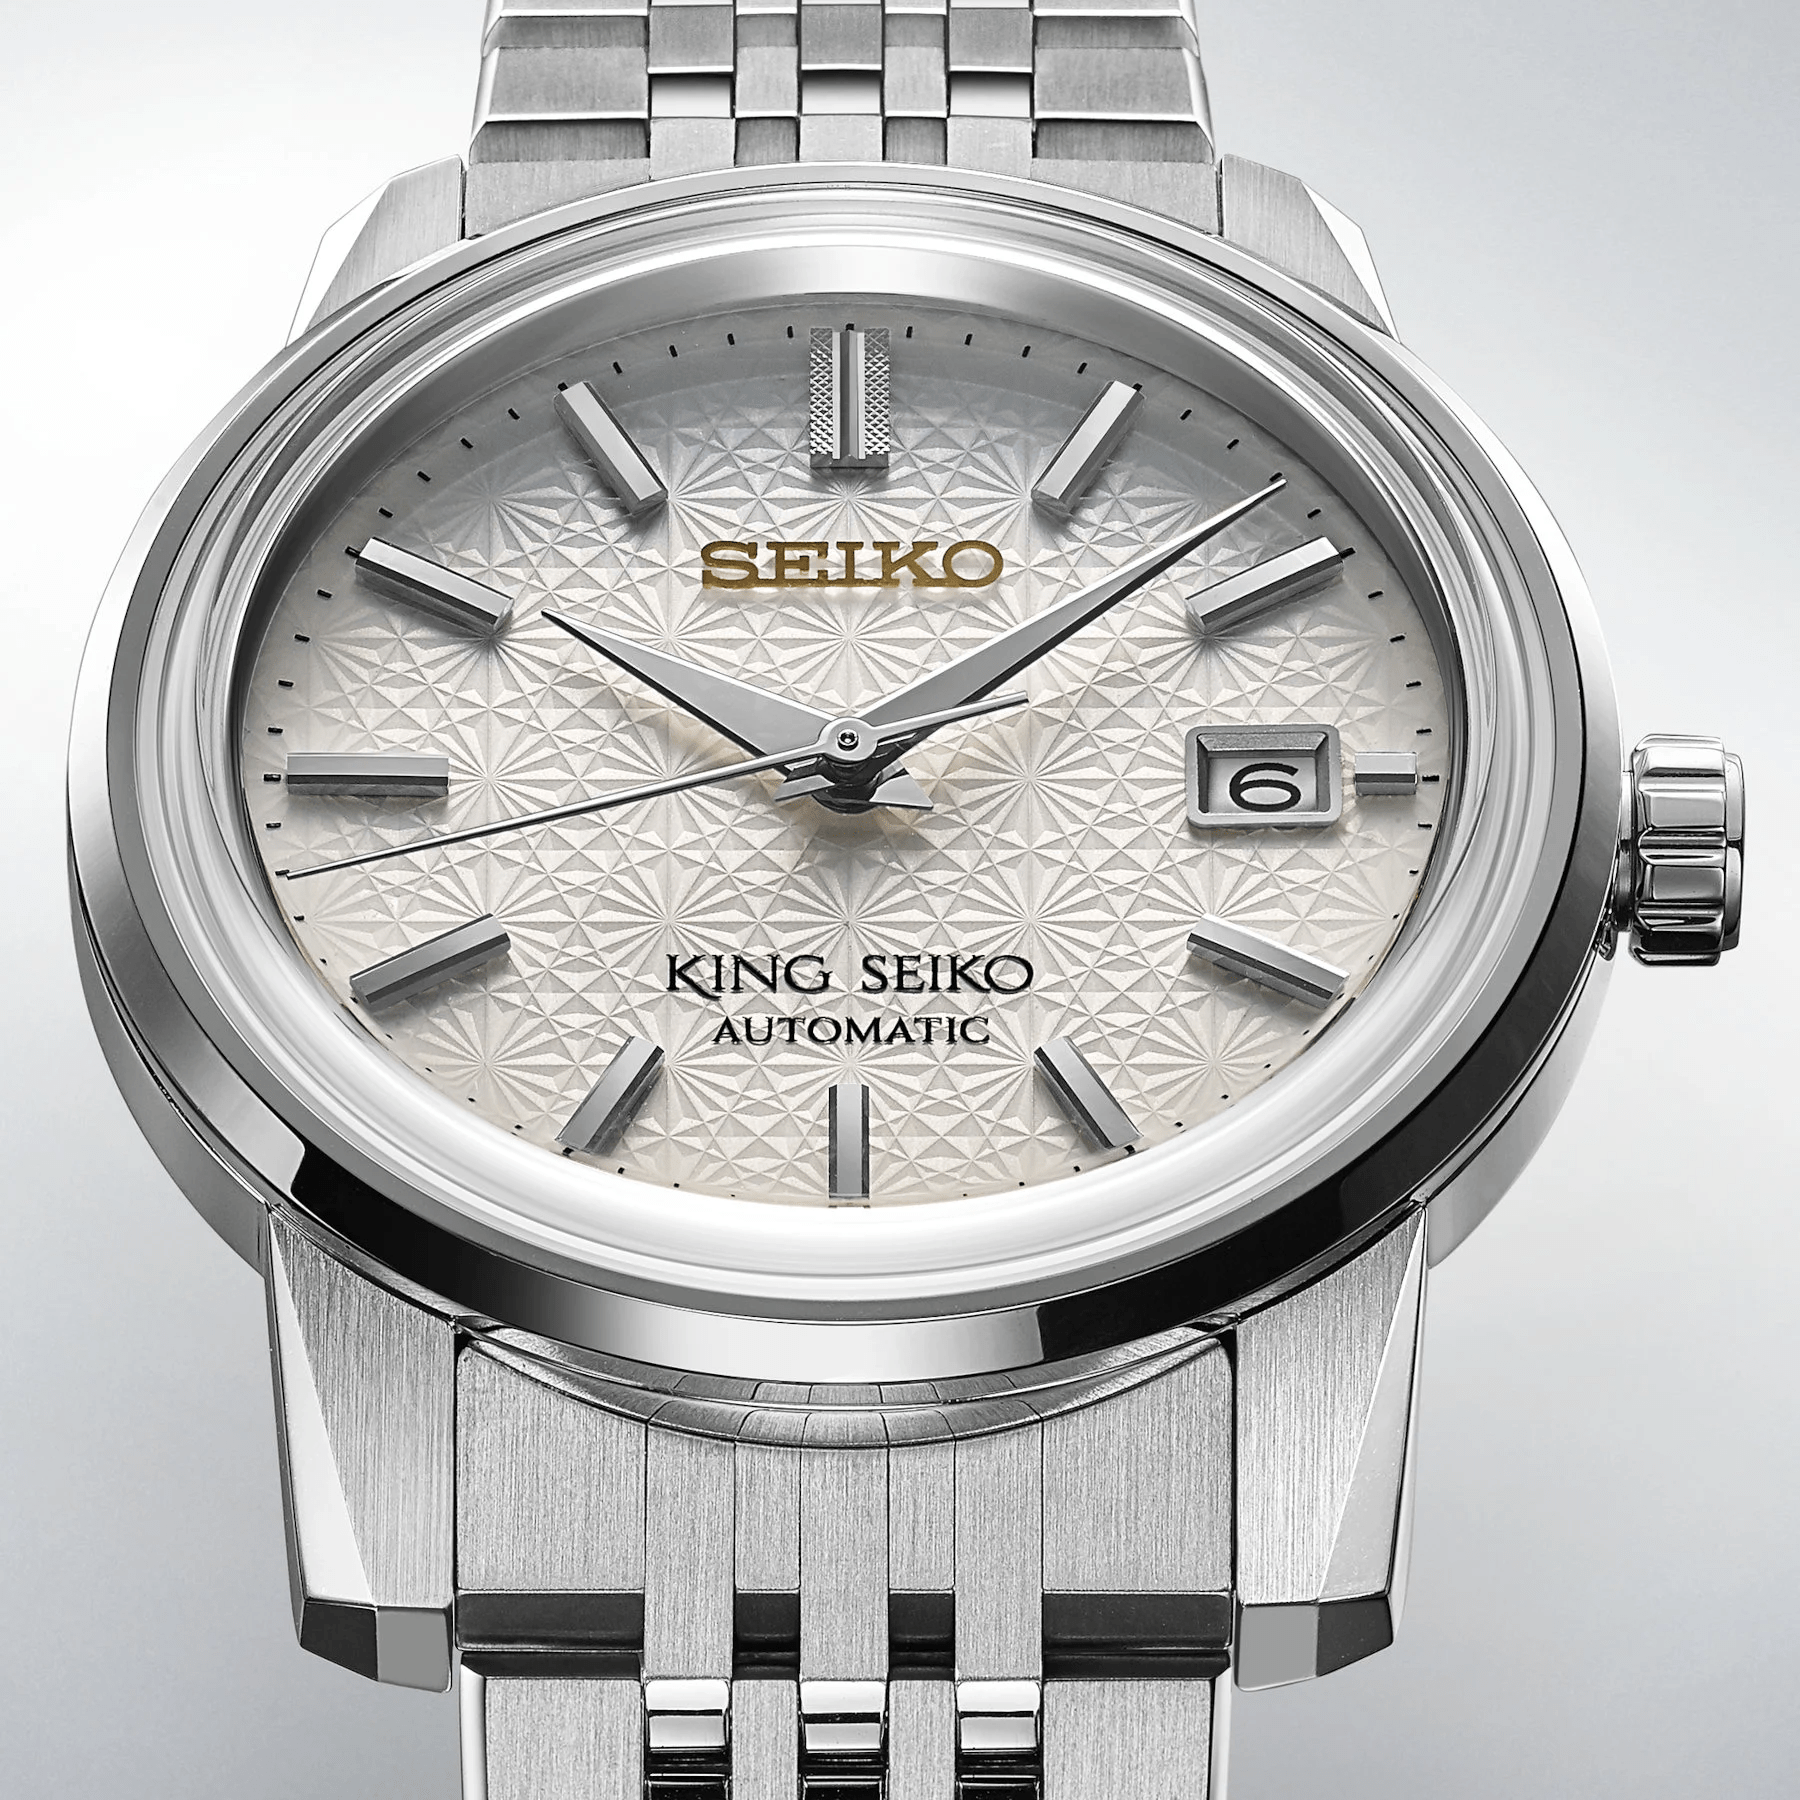 The Chrysanthemum Dial Of The King Seiko Limited Edition SDKA009 SJE095